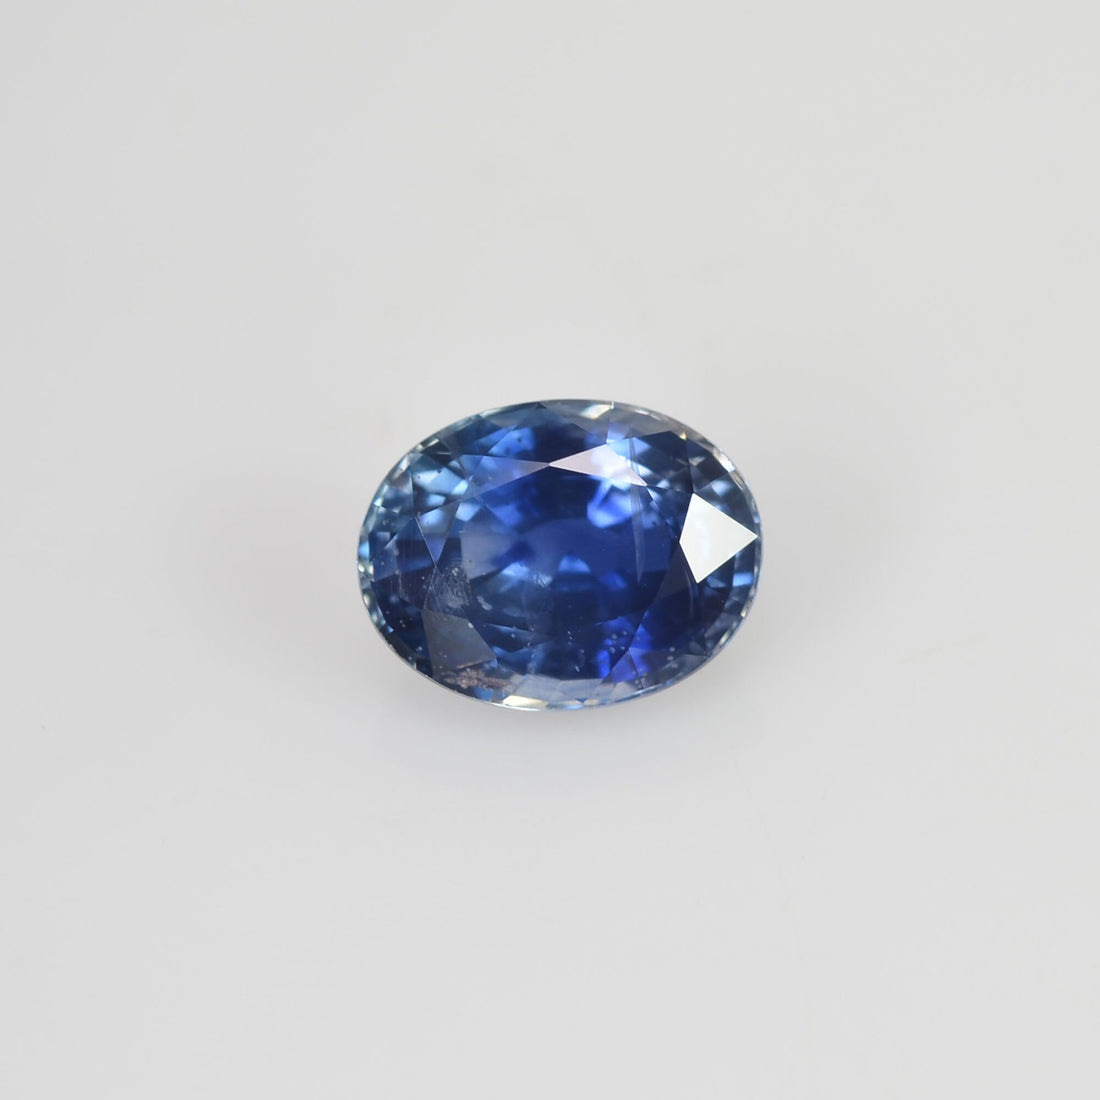 1.62 cts Natural Blue Sapphire Loose Gemstone Oval Cut